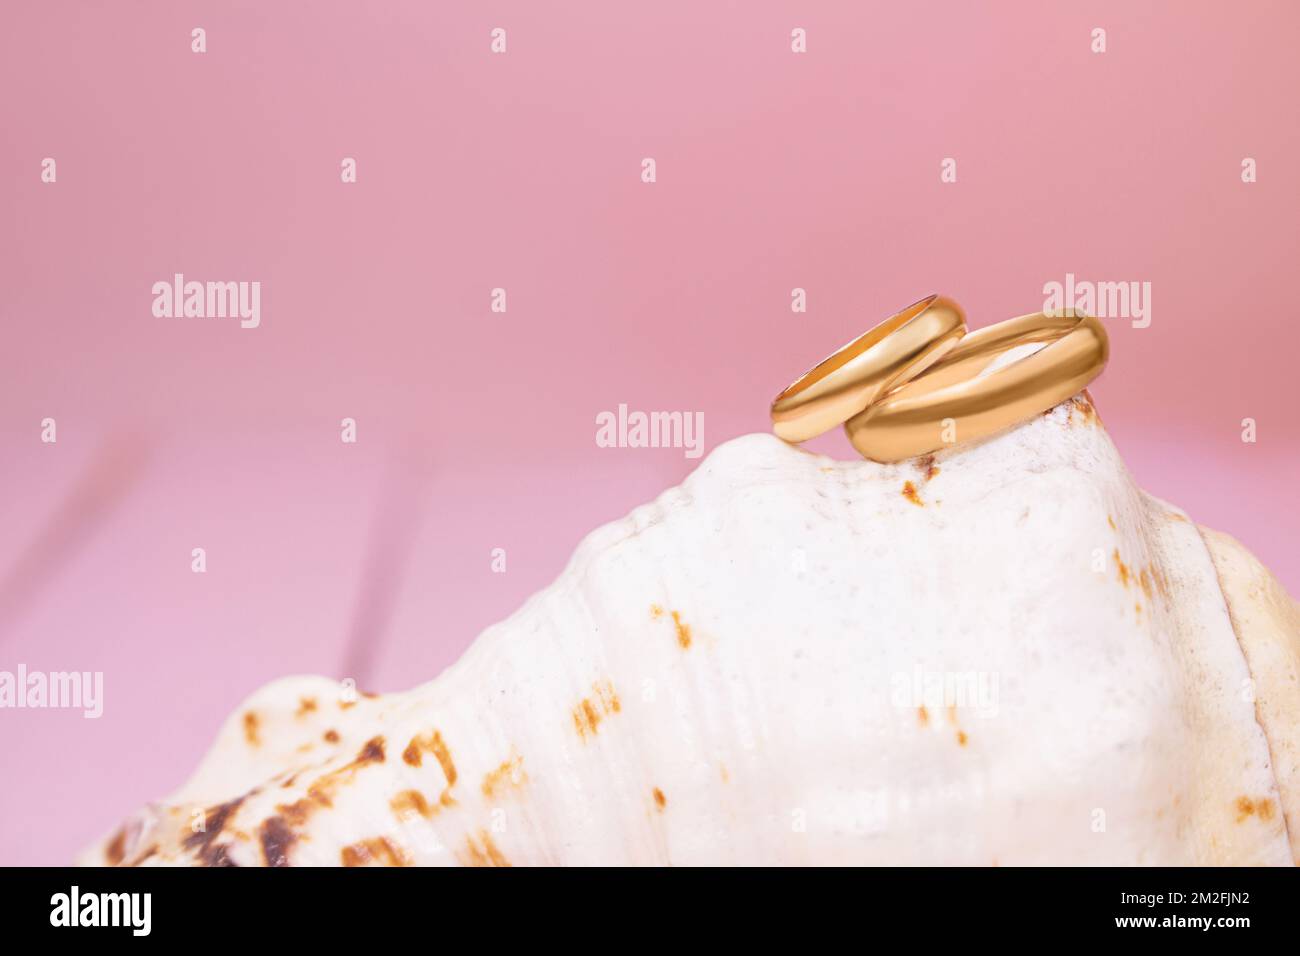 Two gold wedding rings on large shell on blurred pink background. Copy space Stock Photo